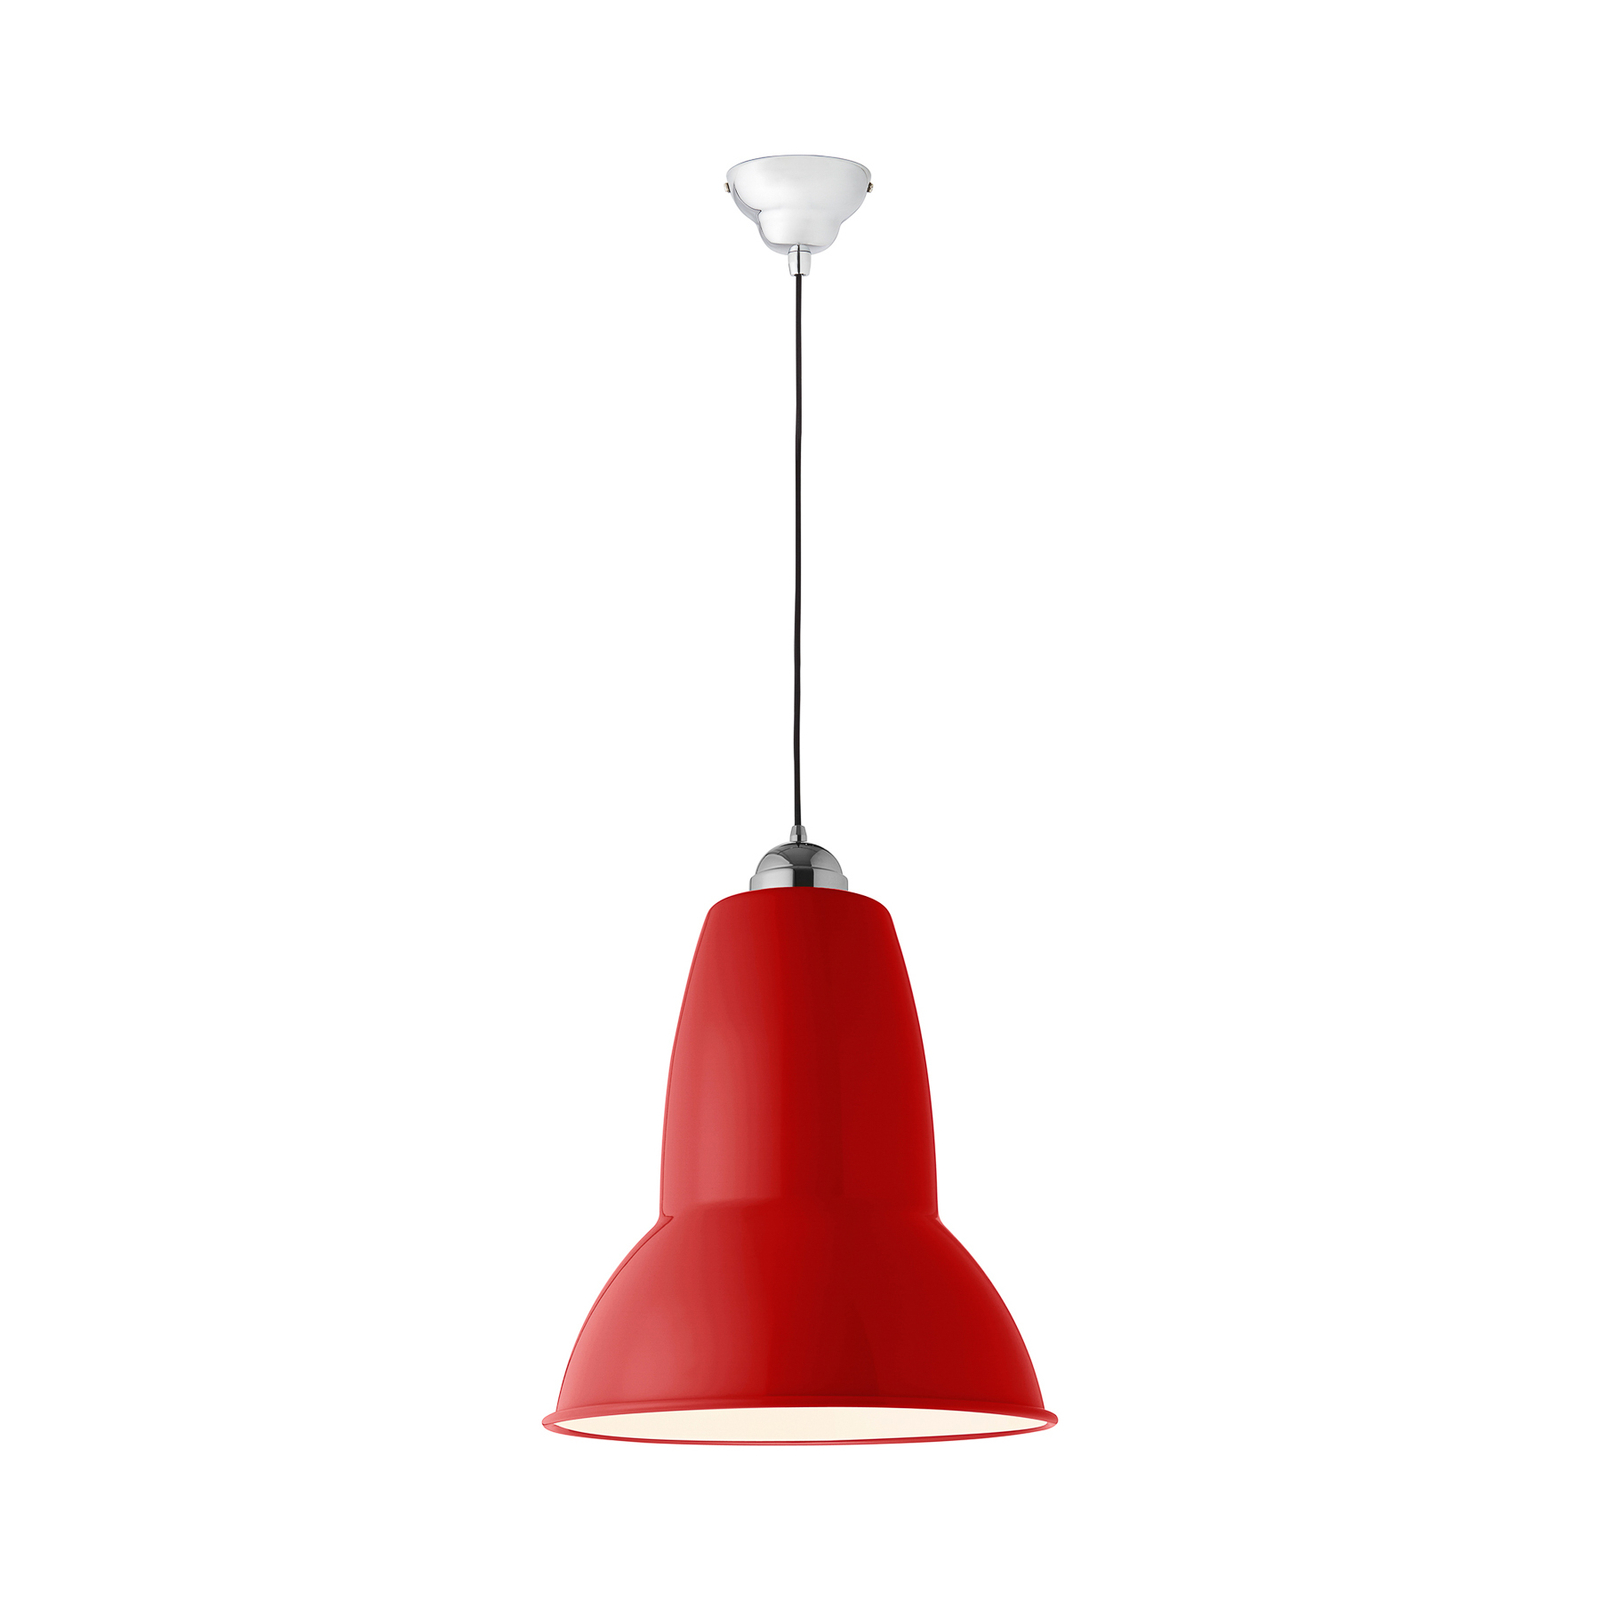 Anglepoise Original 1227 Giant hanging light red